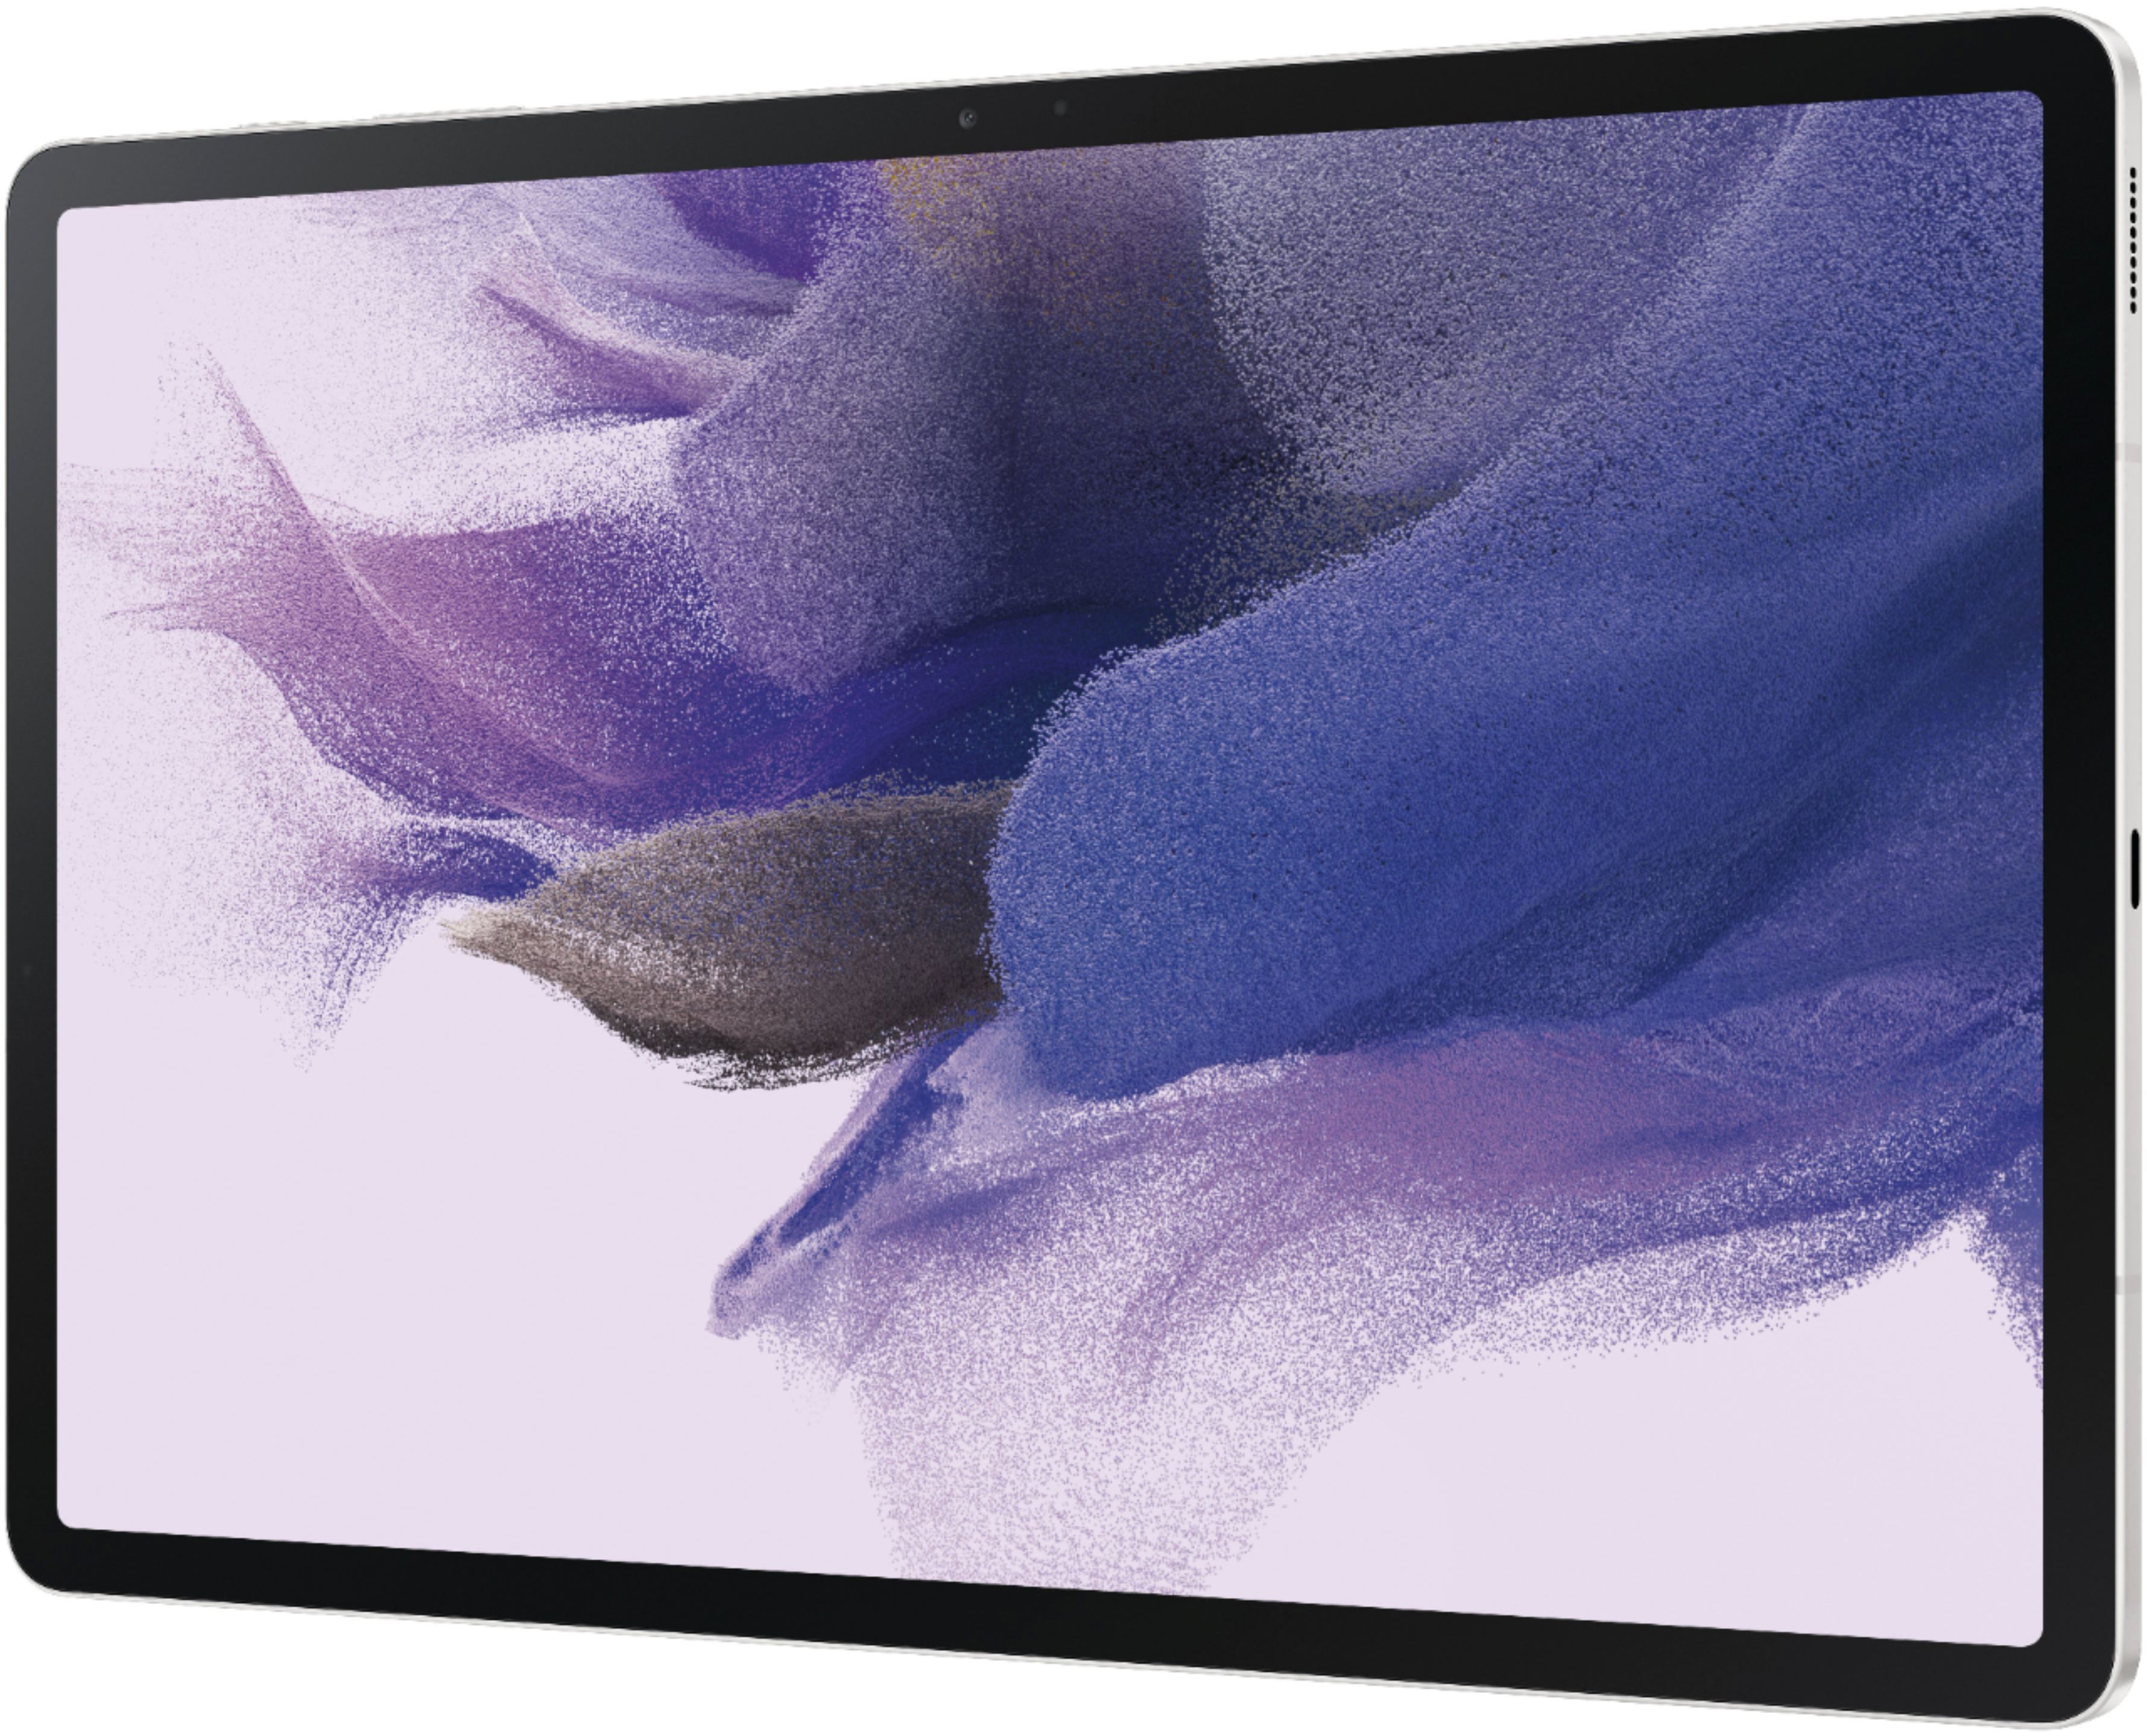 Angle View: Apple - 12.9-Inch iPad Pro with Wi-Fi + Cellular - 256GB (Unlocked) - Space Gray